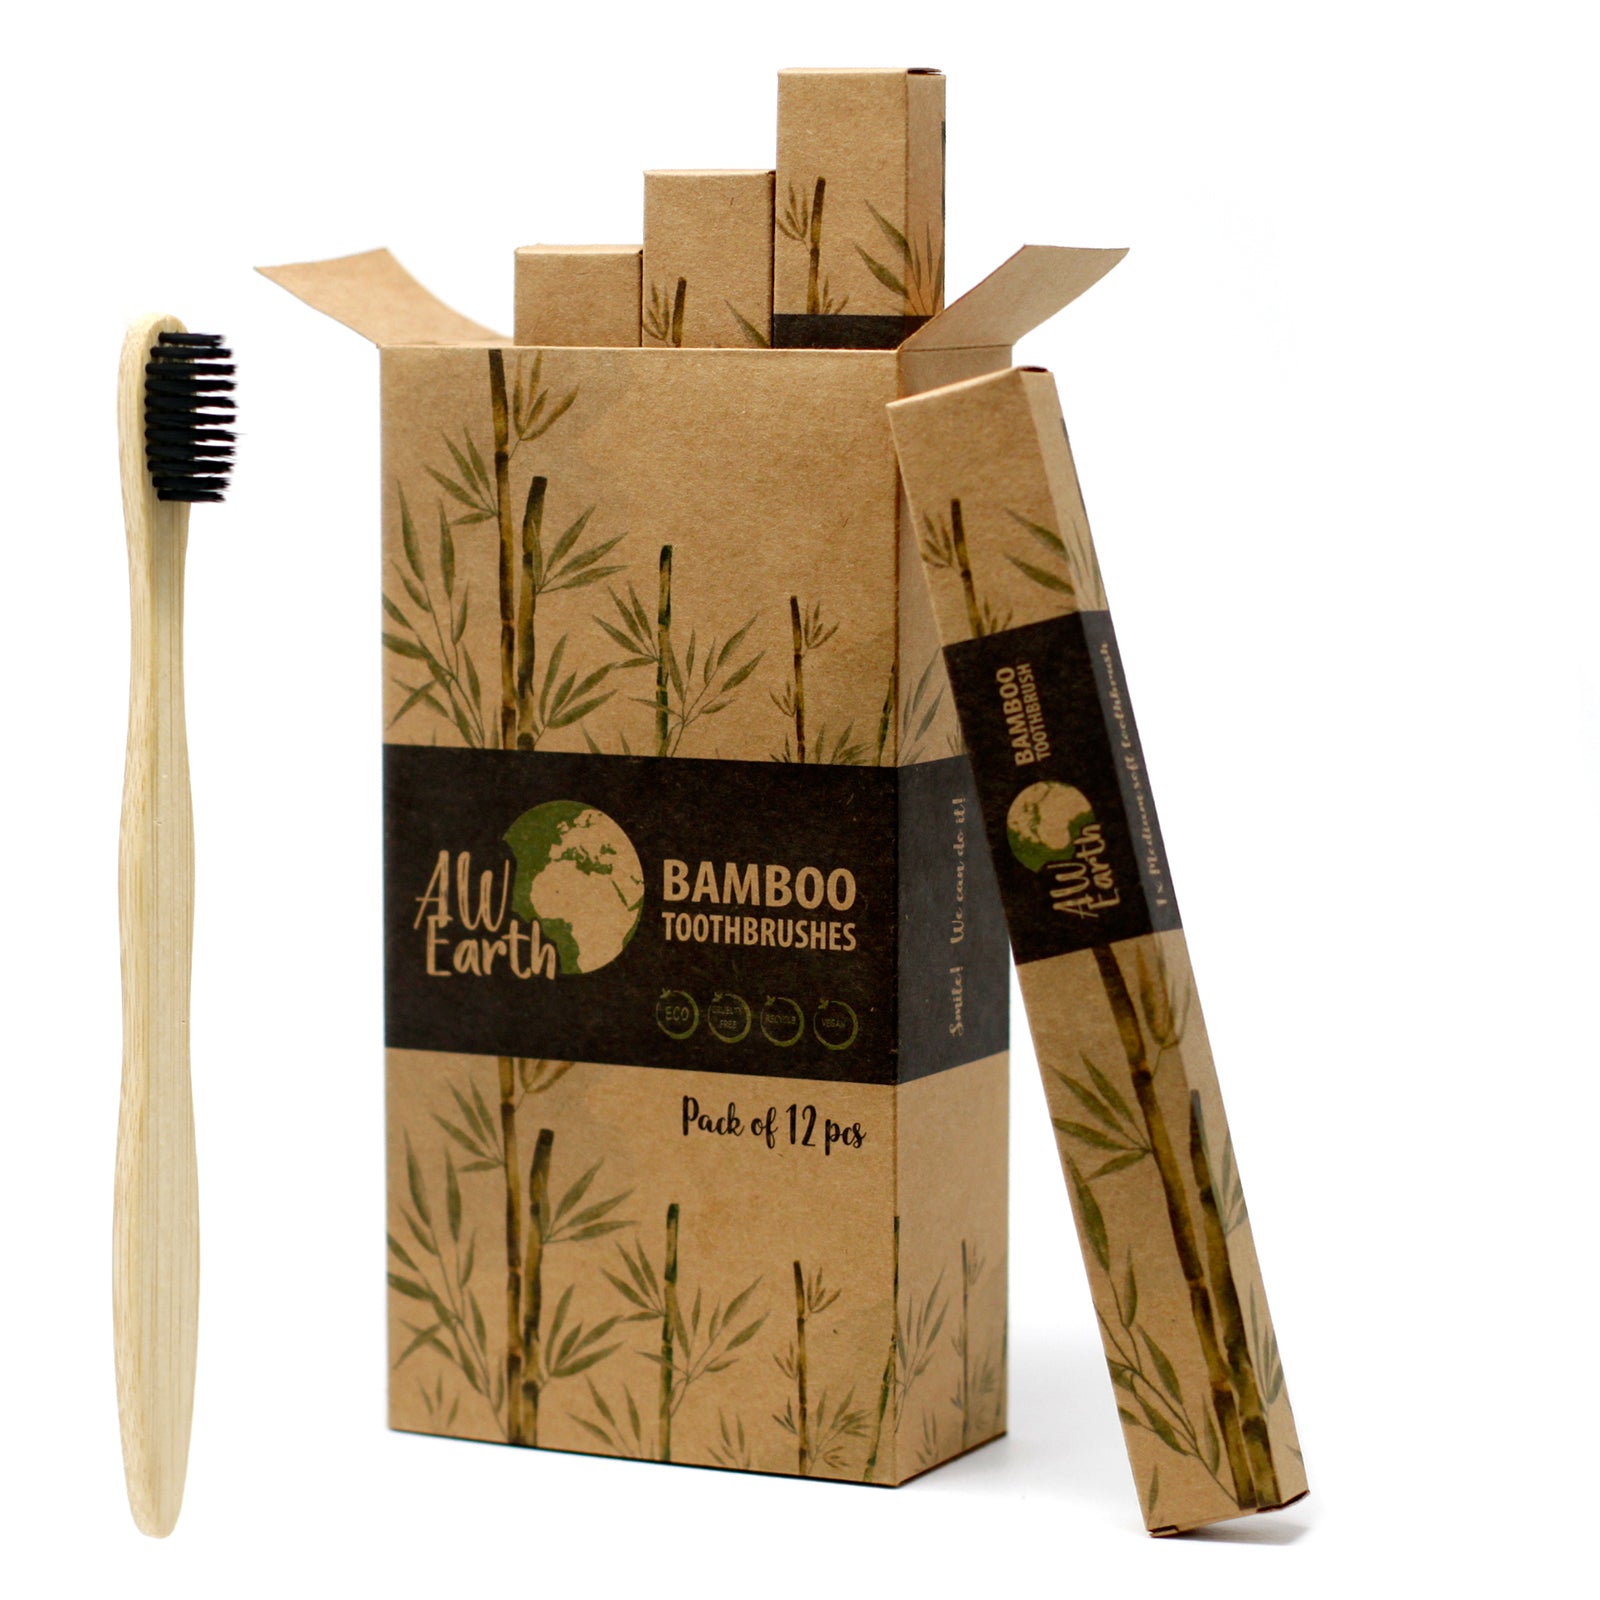 View Bamboo Toothbrush Charcoal Medium Soft information